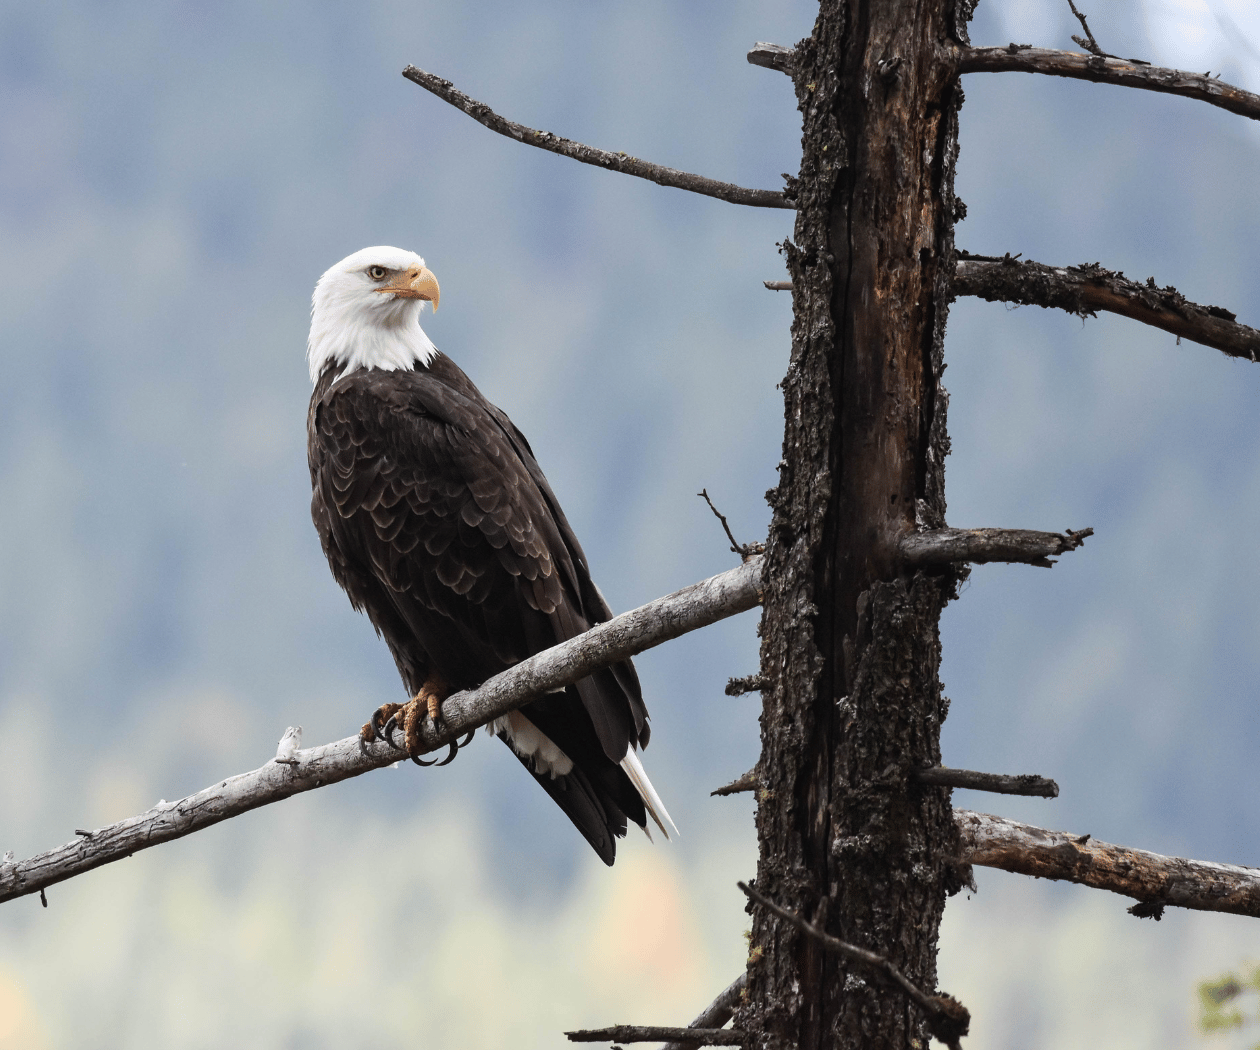 American Bald Eagle perched on dead tree branch